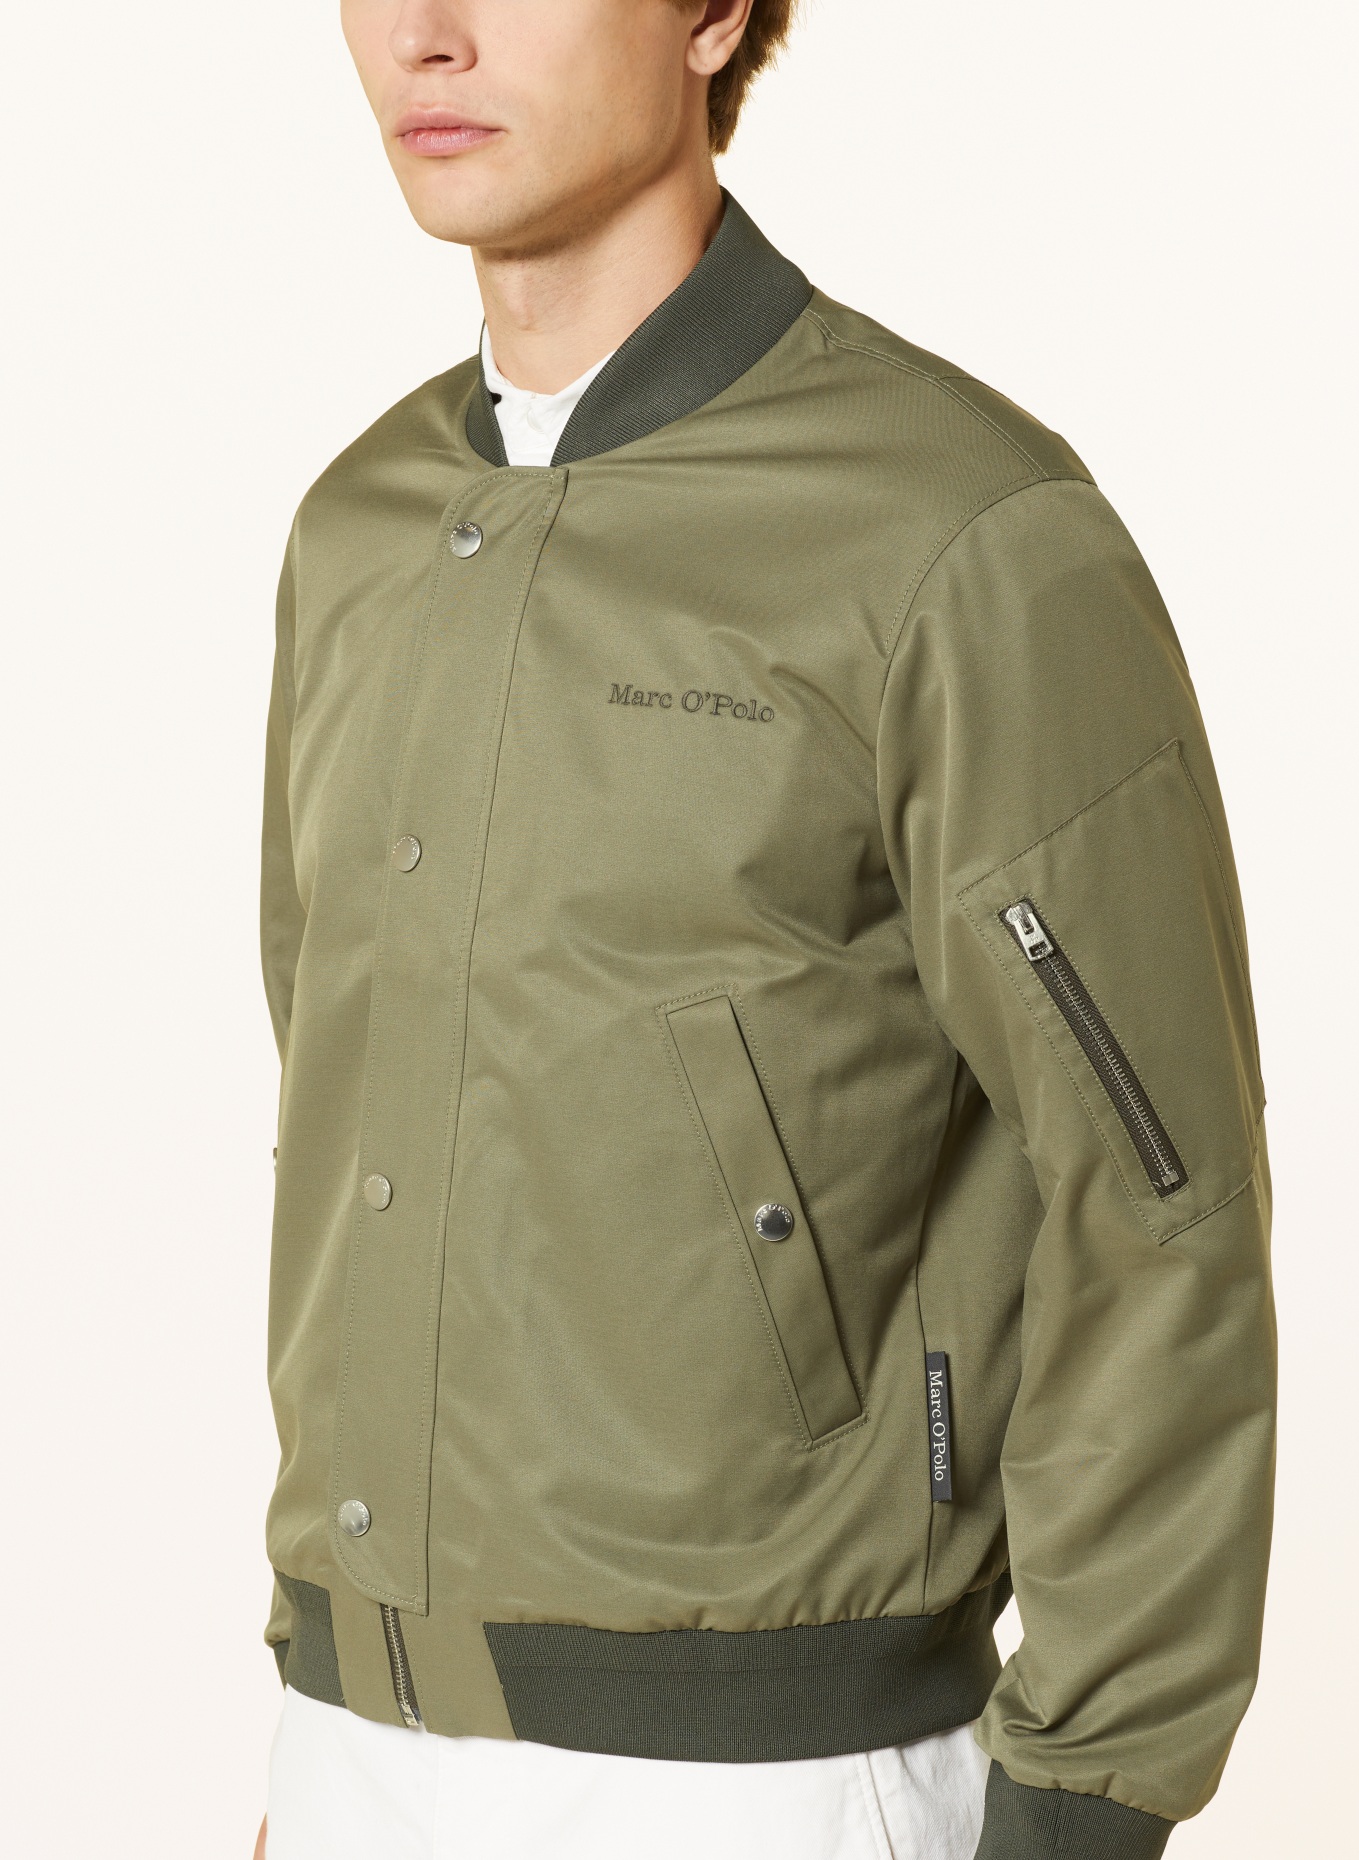 Marc O'Polo Bomber jacket ESSENTIAL, Color: OLIVE (Image 4)